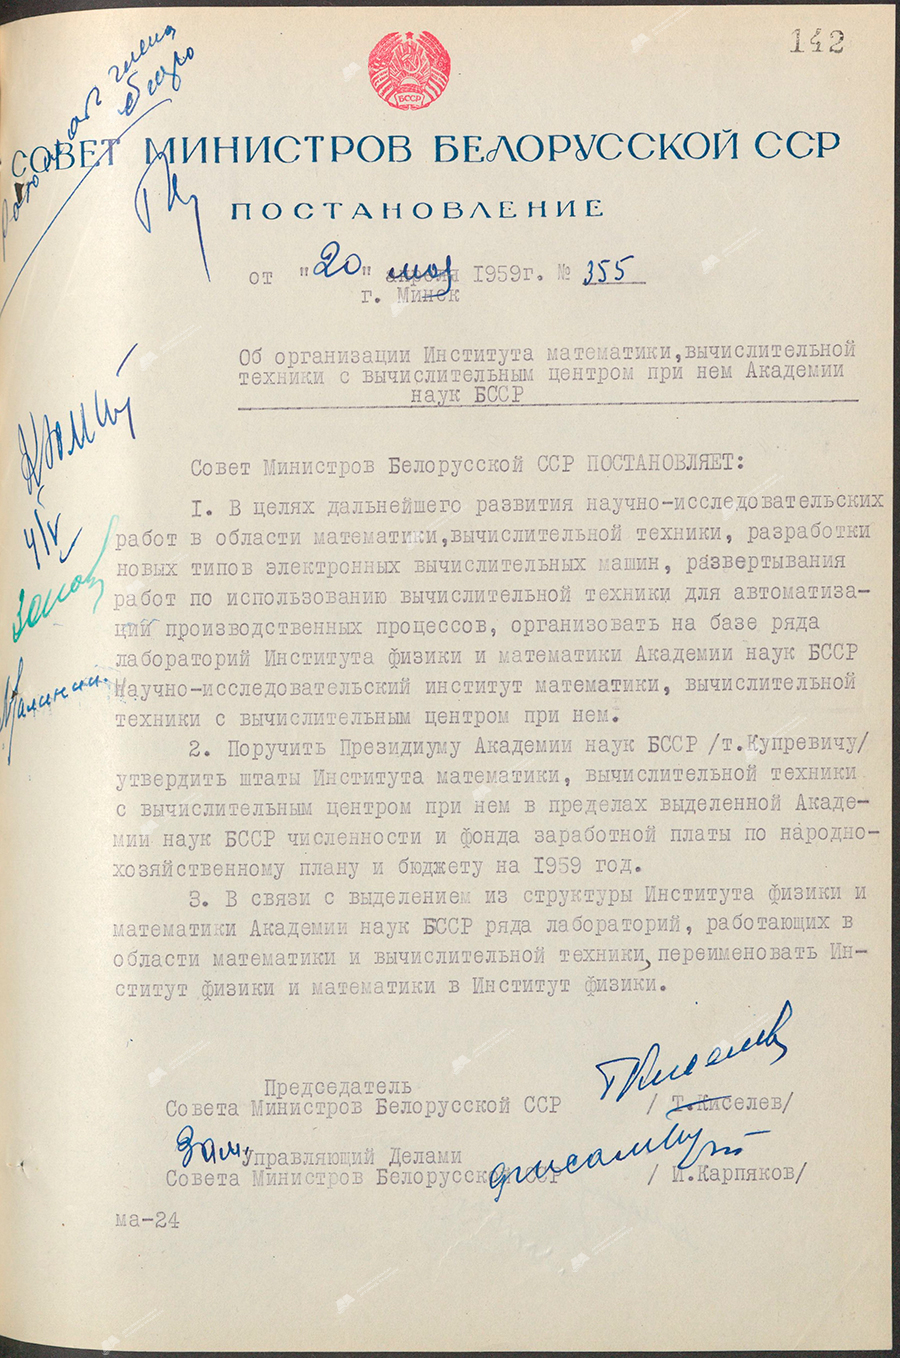 Resolution No. 355 of the Council of Ministers of the BSSR «On the organization of the Institute of Mathematics and Computer Science with a computer center attached to it of the Academy of Sciences of the BSSR»-стр. 0